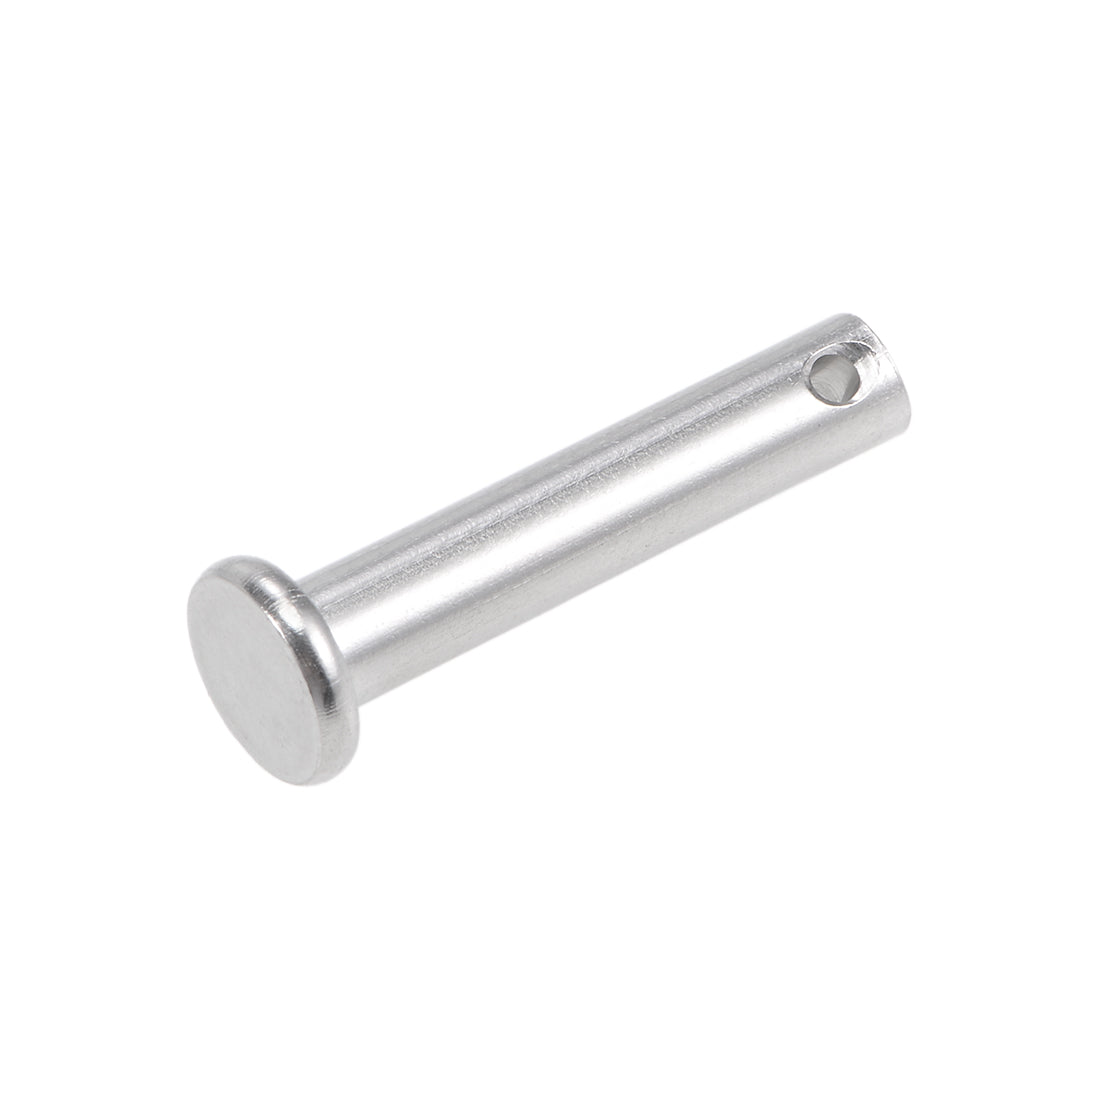 Uxcell Uxcell Single Hole Clevis Pins - 3mm x 8mm Flat Head 304 Stainless Steel Link Hinge Pin 10Pcs